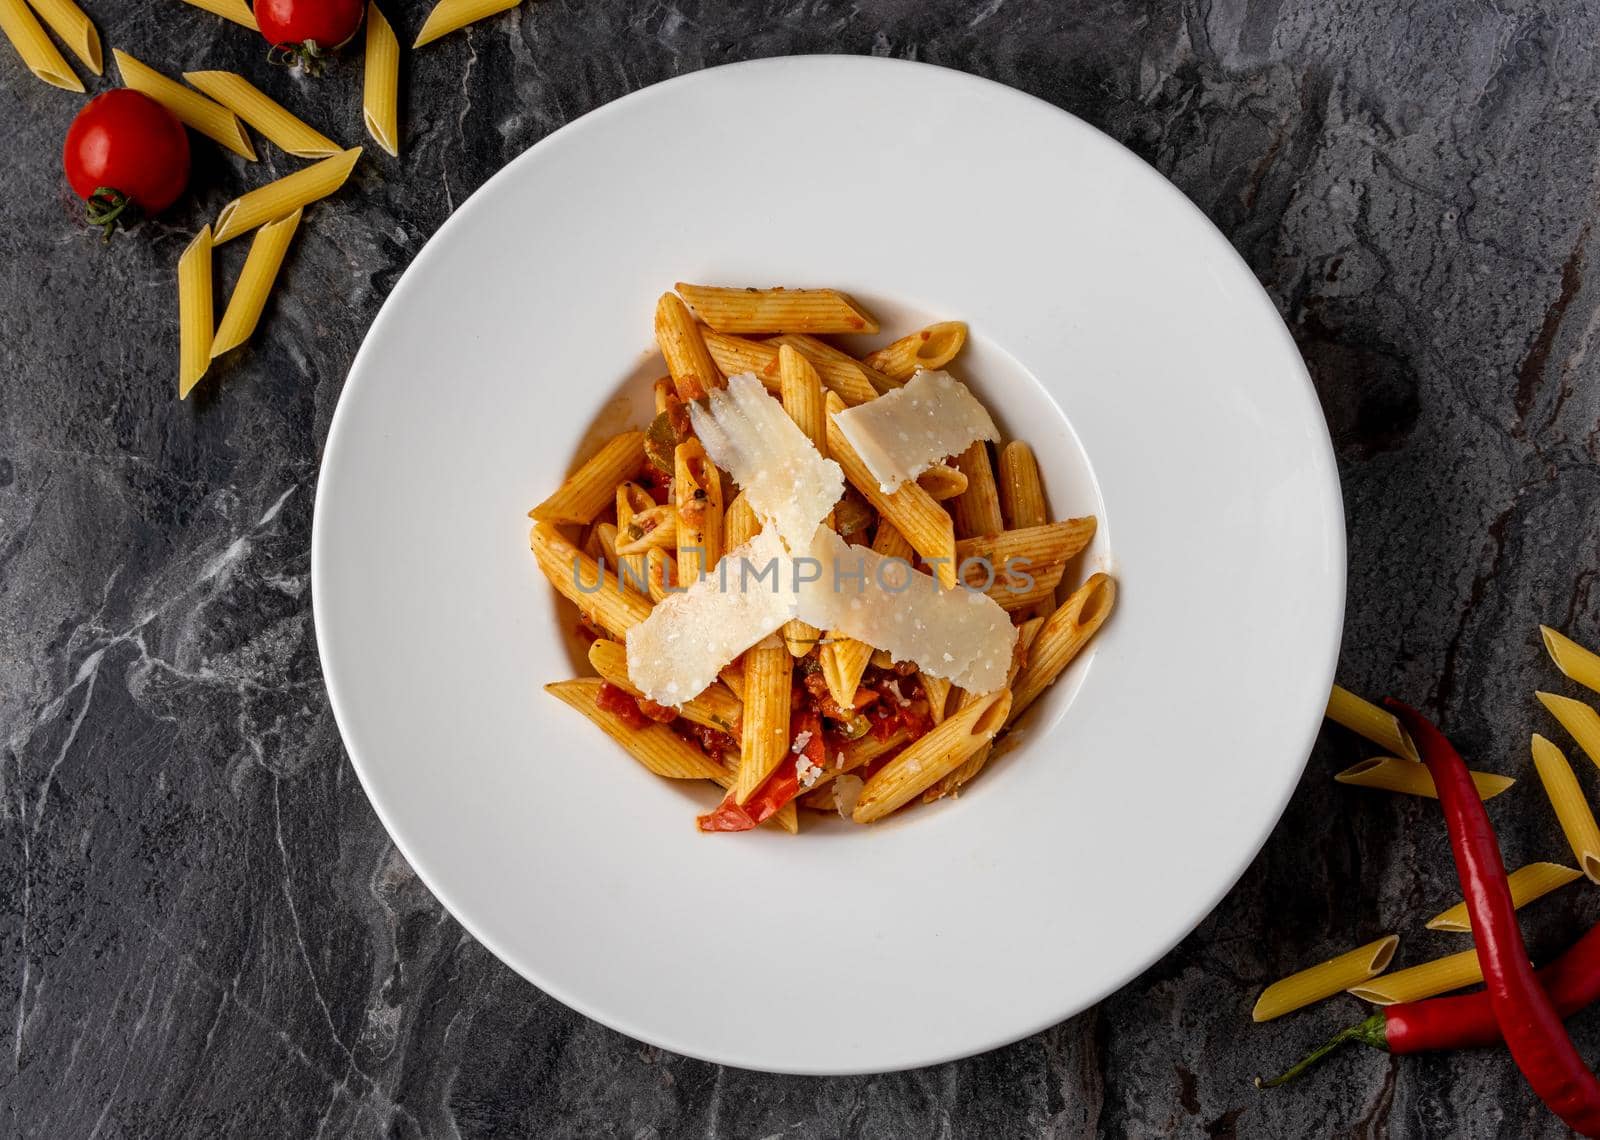 Penne pasta with a spicy sauce, chili pepper and grated parmesan cheese